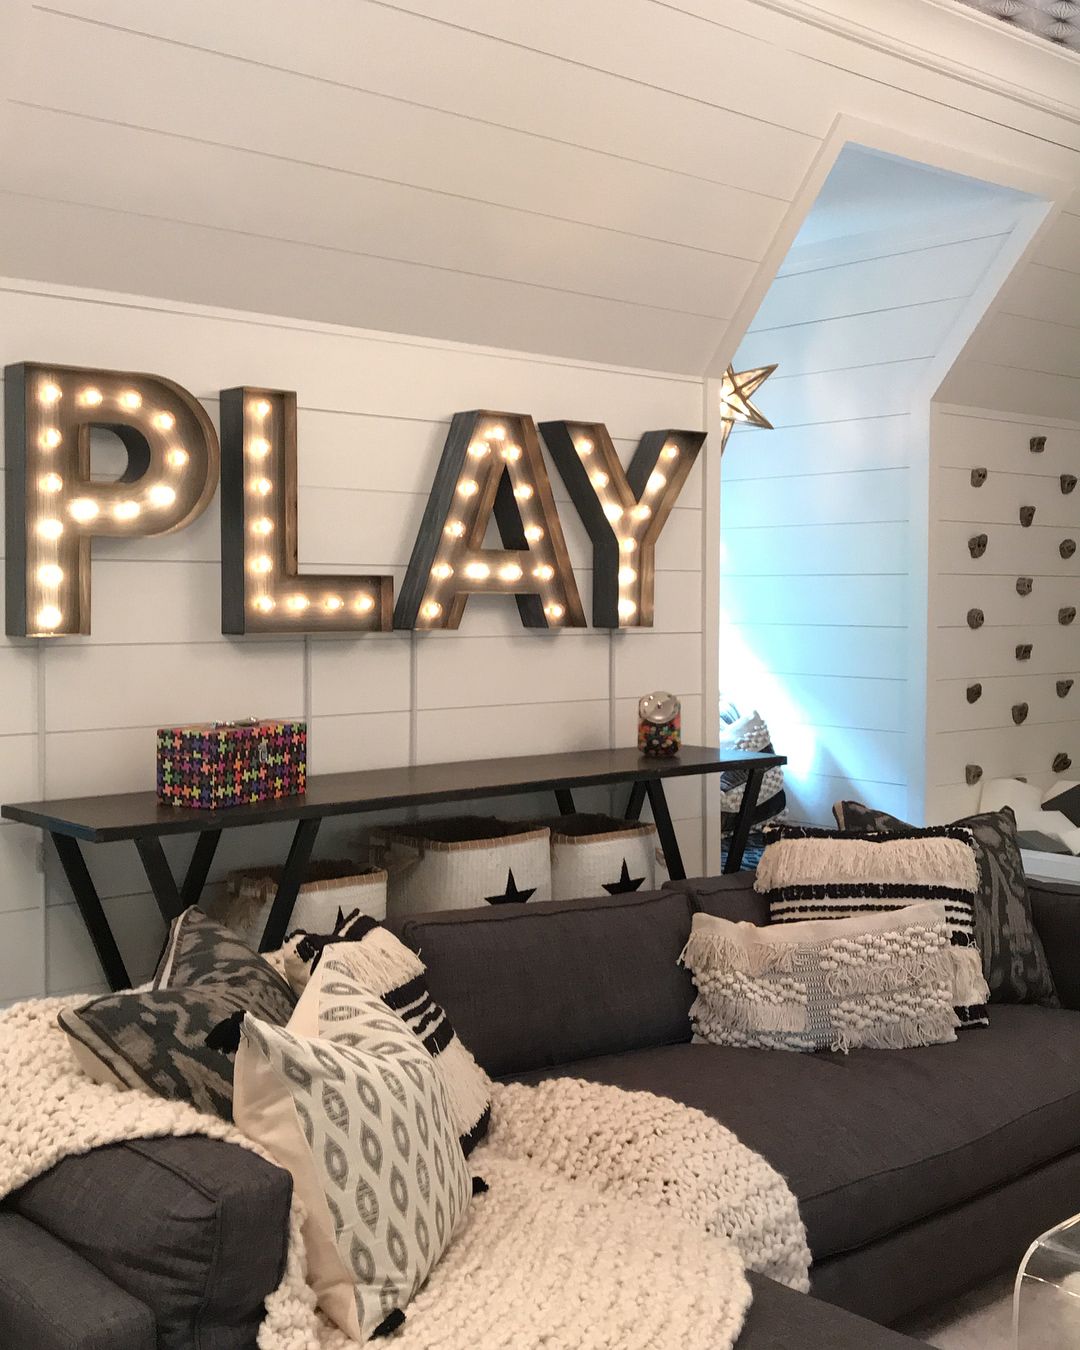 LINEN & FLAX CO. on Instagram: “Take a look at our recent project…Playroom Dreams! Every inch of this space is filled with form, function and whimsy! The black and white…”